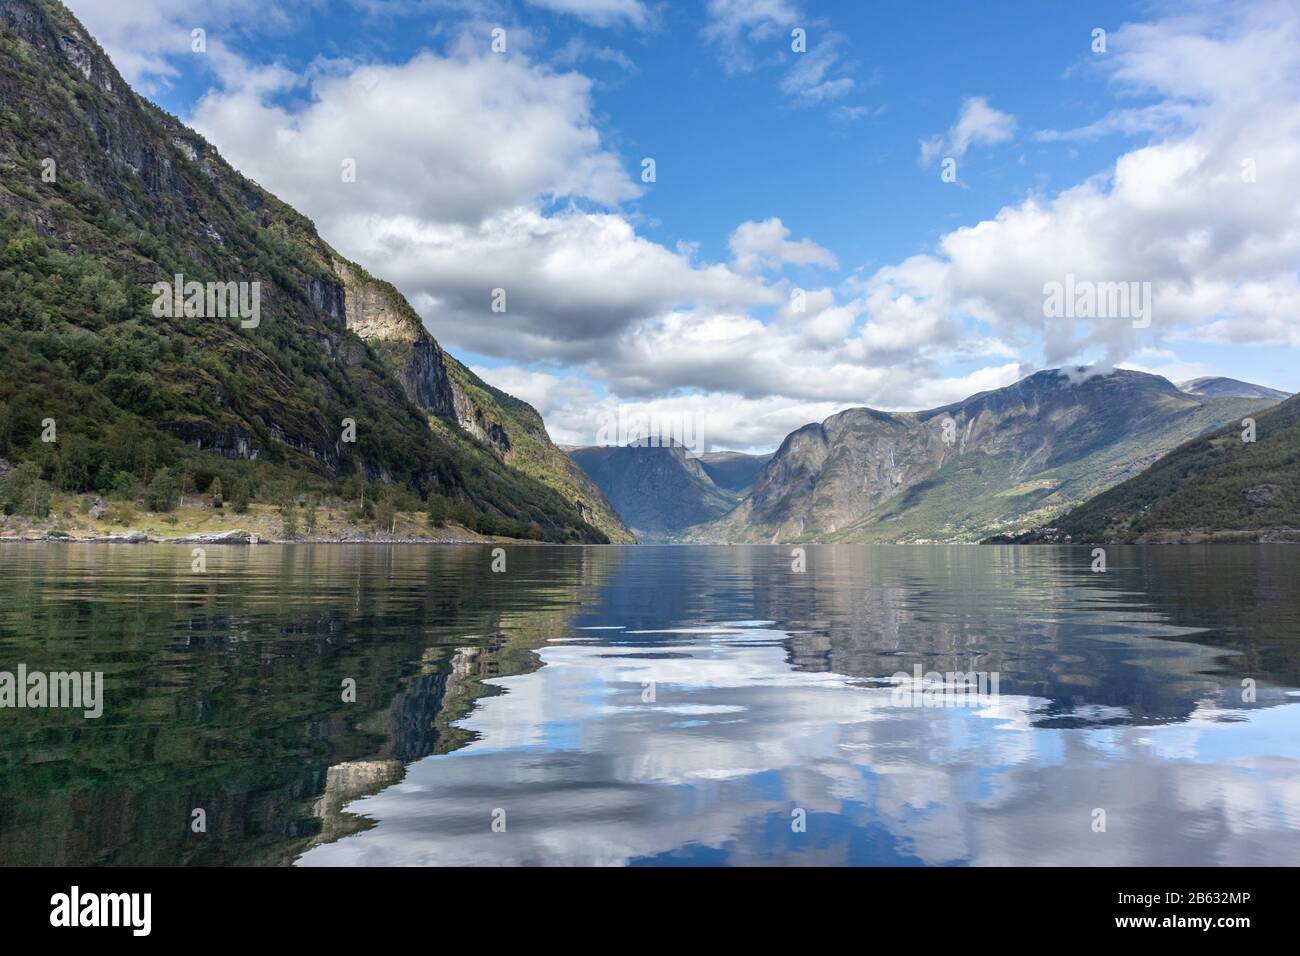 View from water surface with bright reflection. Norway Aurlandsfjord fjord travel, kayaking tour. Nature, mountains, blue landscape, cloudy epic view. Stock Photo